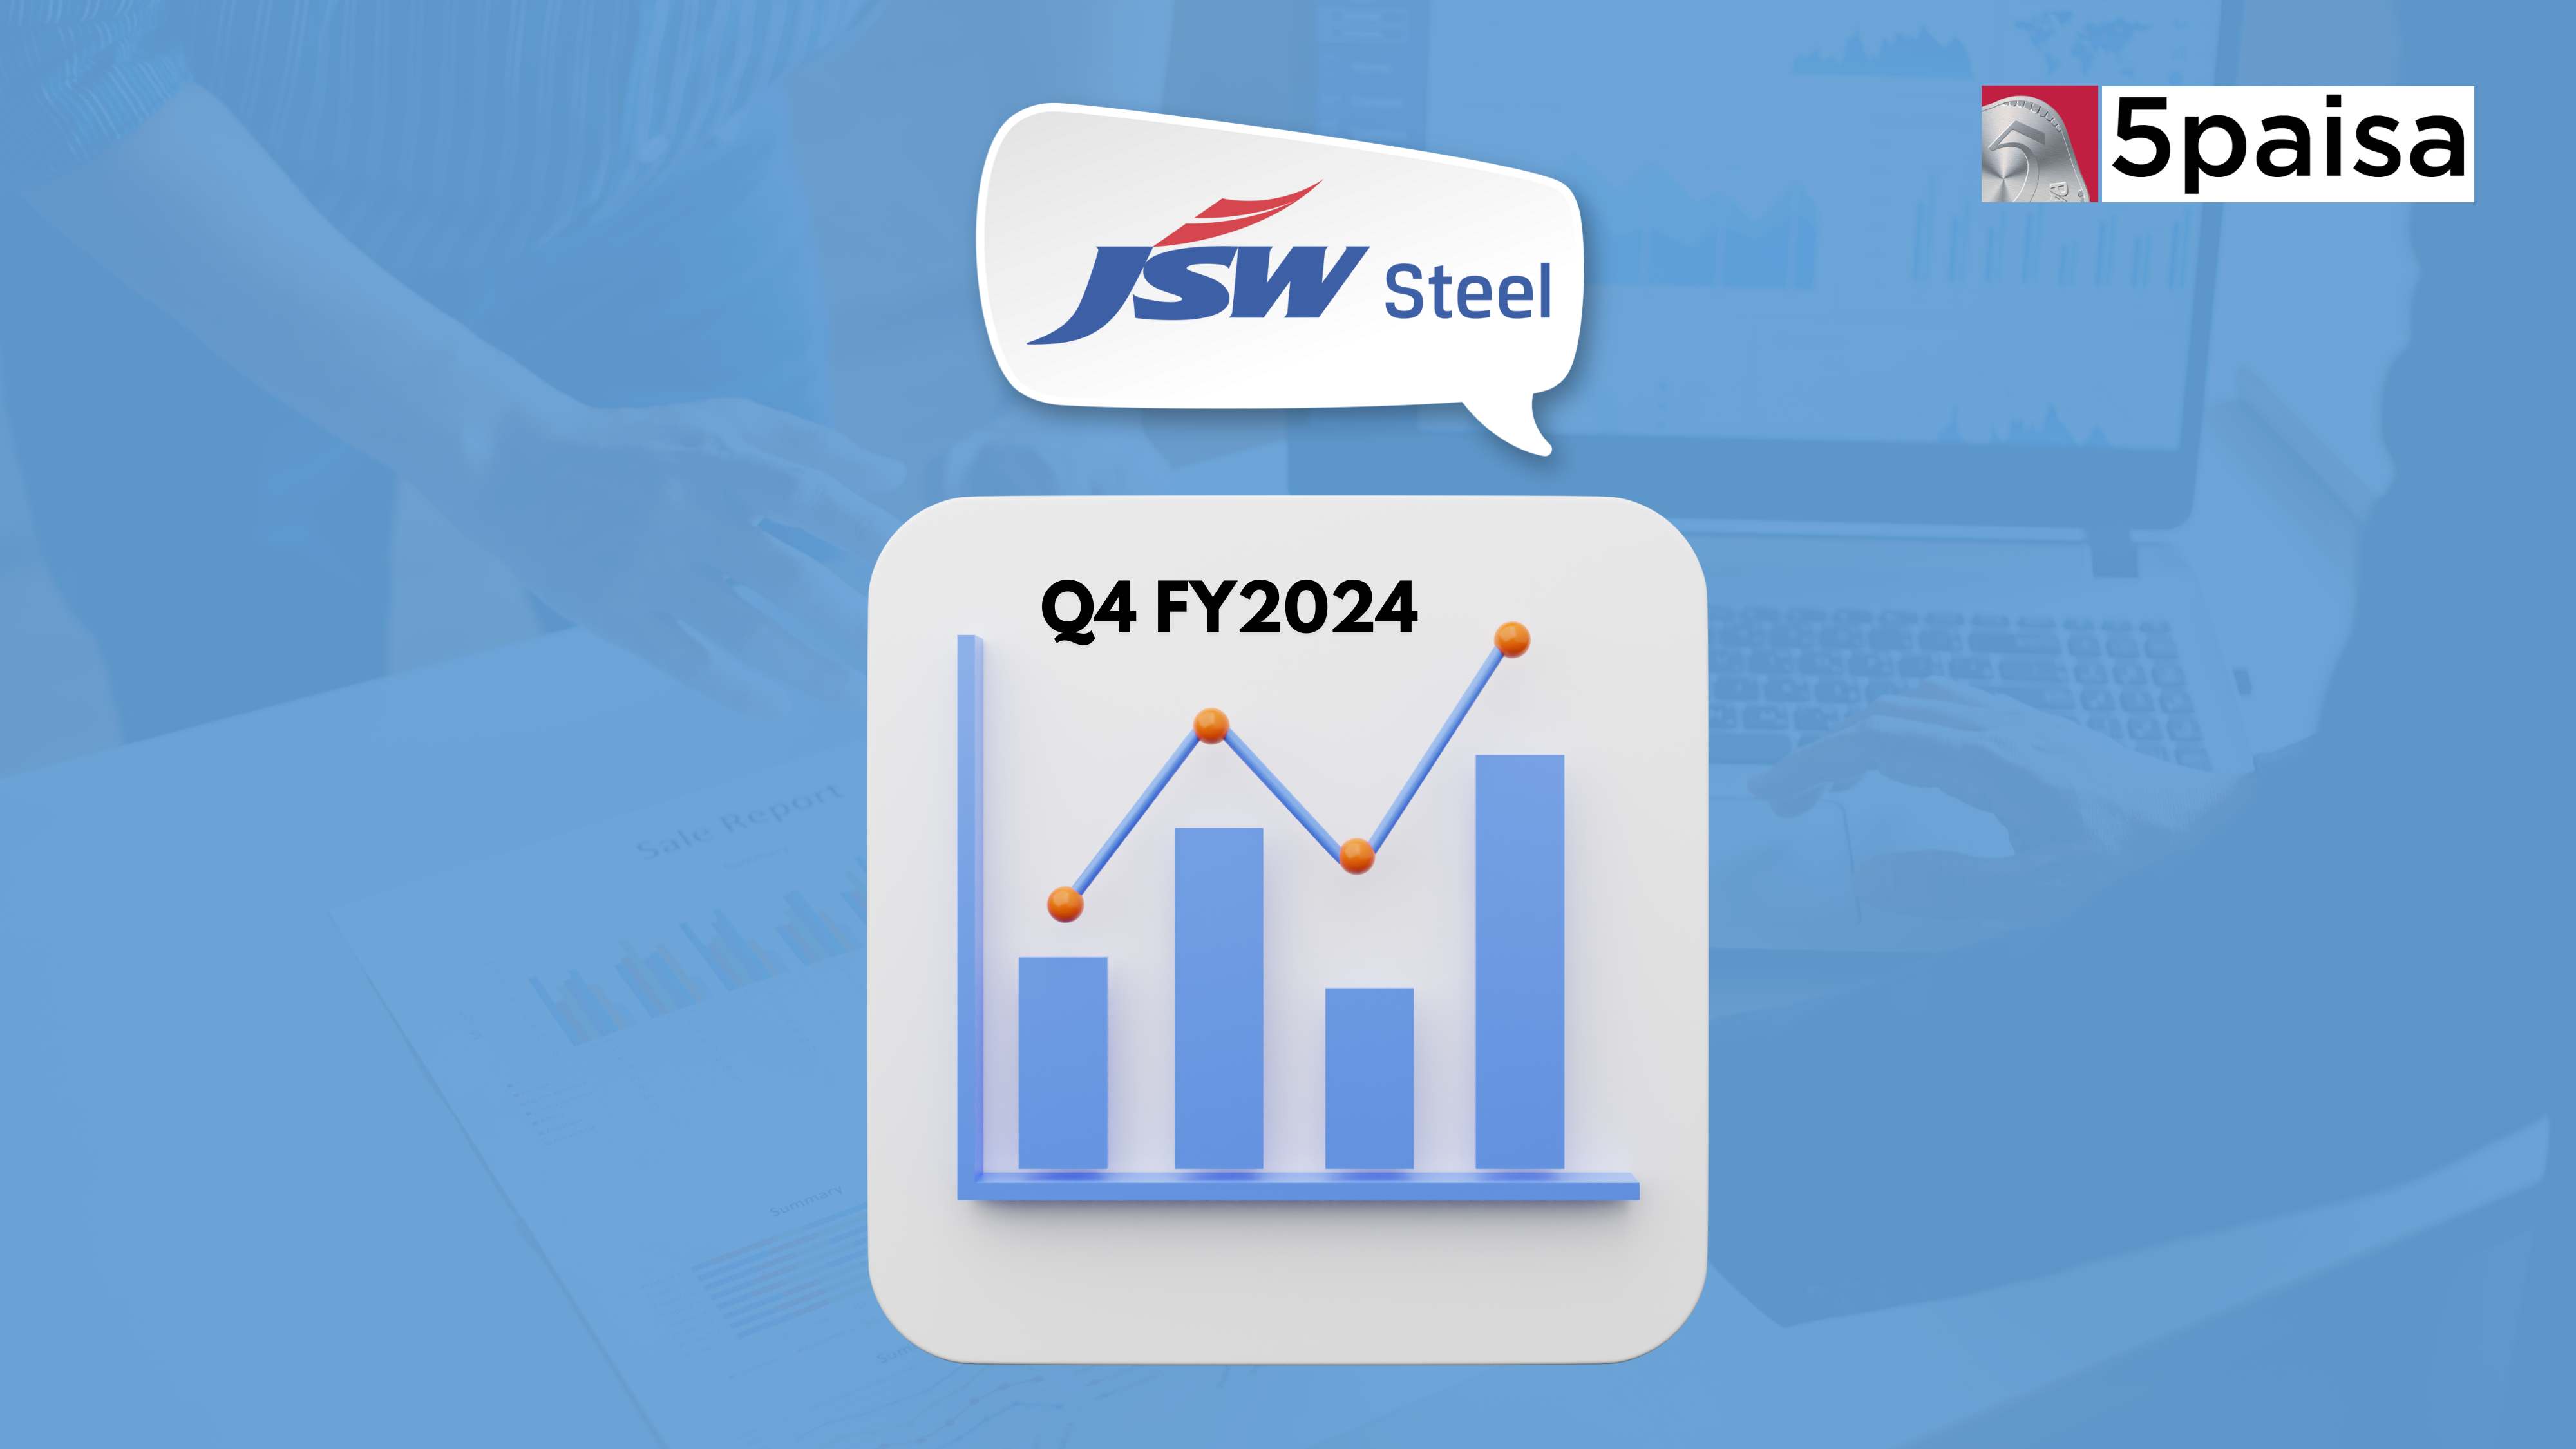 JSW Steel Q4 2024 Results: Consolidated PAT detained 54% while revenue decreased marginally by 1.93% on a YOY basis